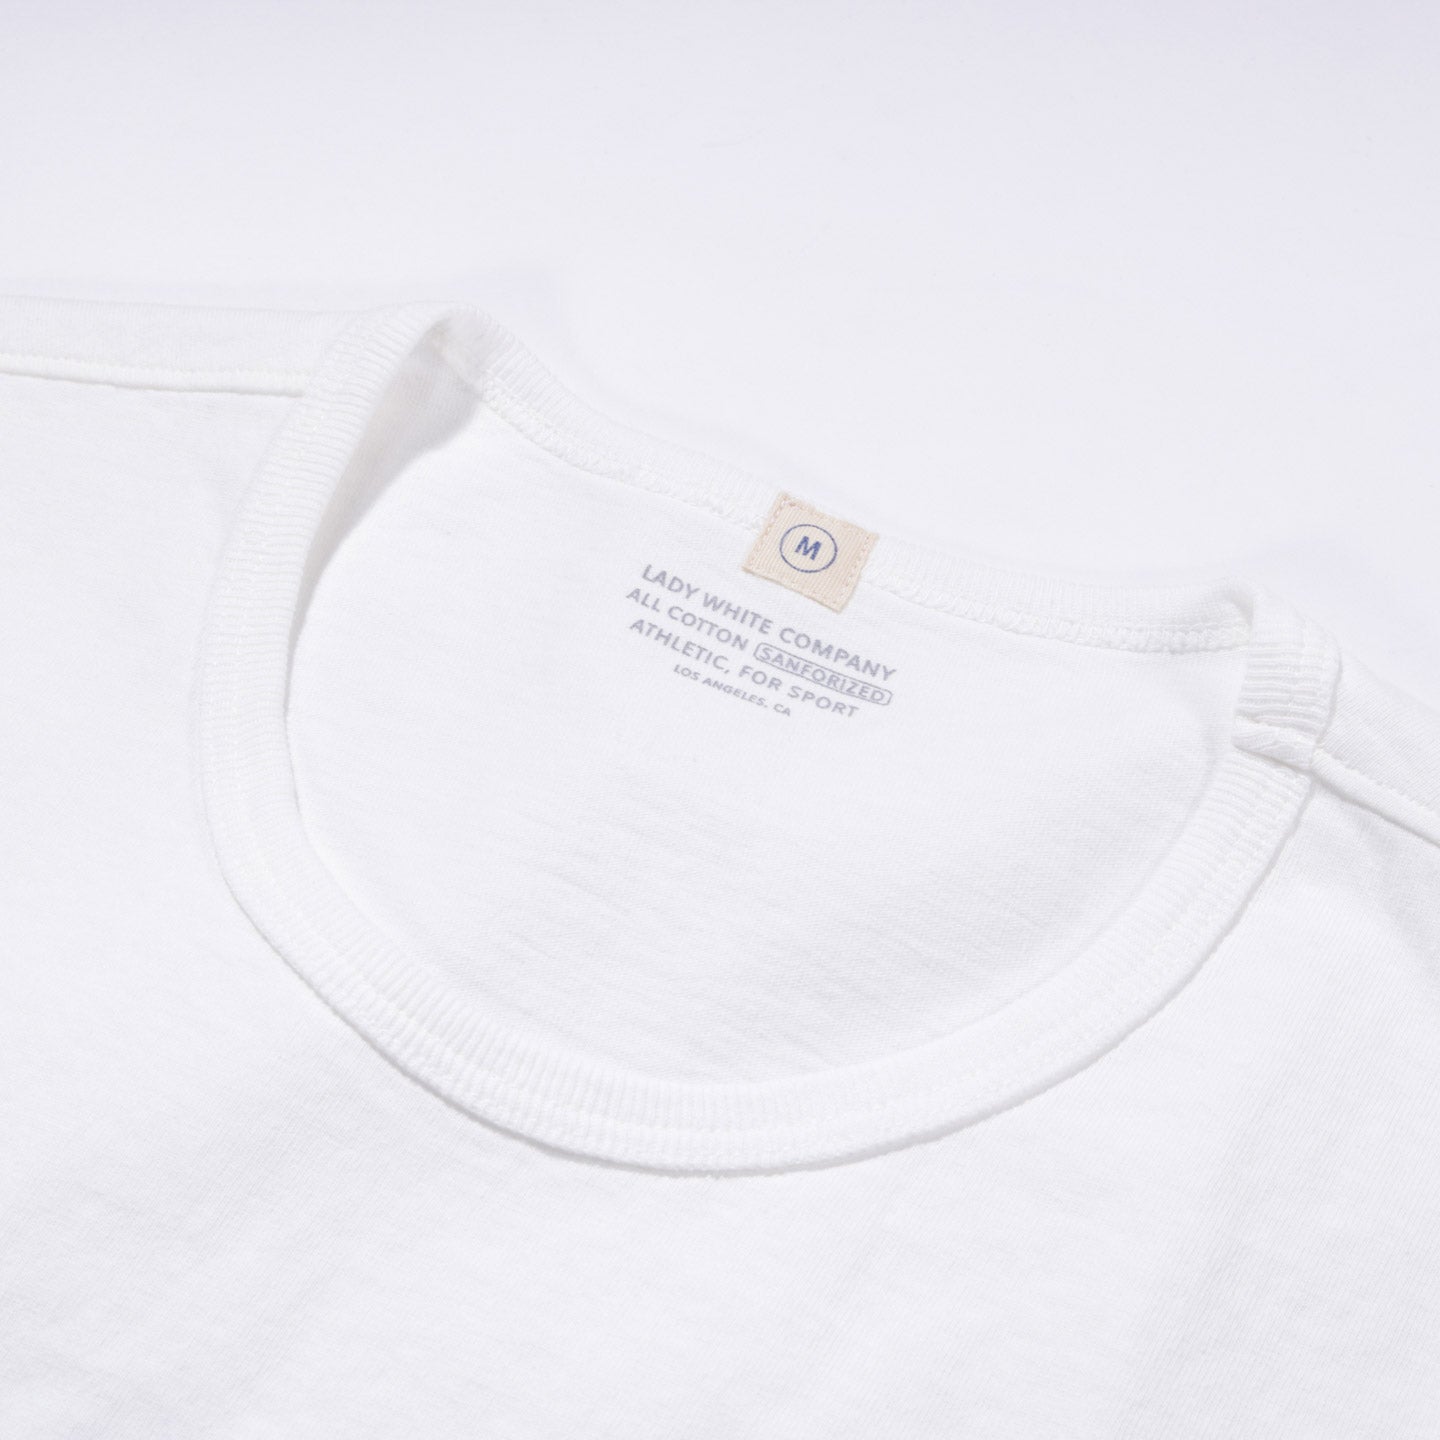 LADY WHITE CO. T-SHIRT 2-PACK WHITE